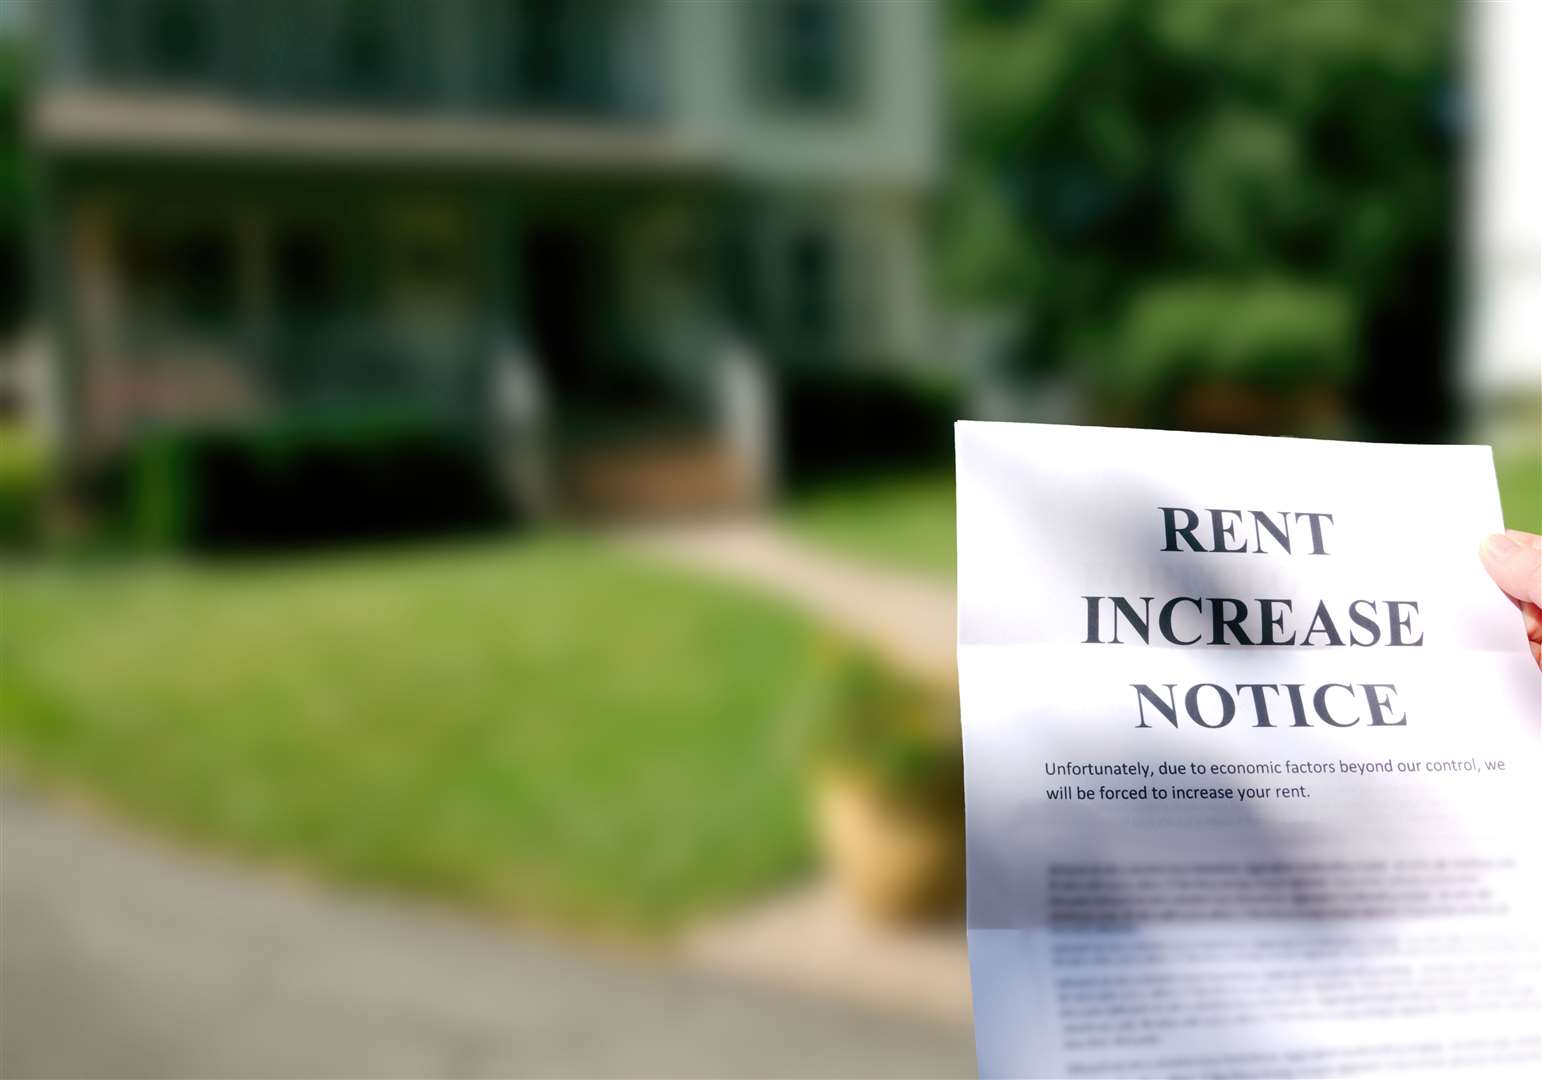 Some council tenants will now be paying 20 per cent more in rent each month. Image: Keith Allen – stock.adobe.com